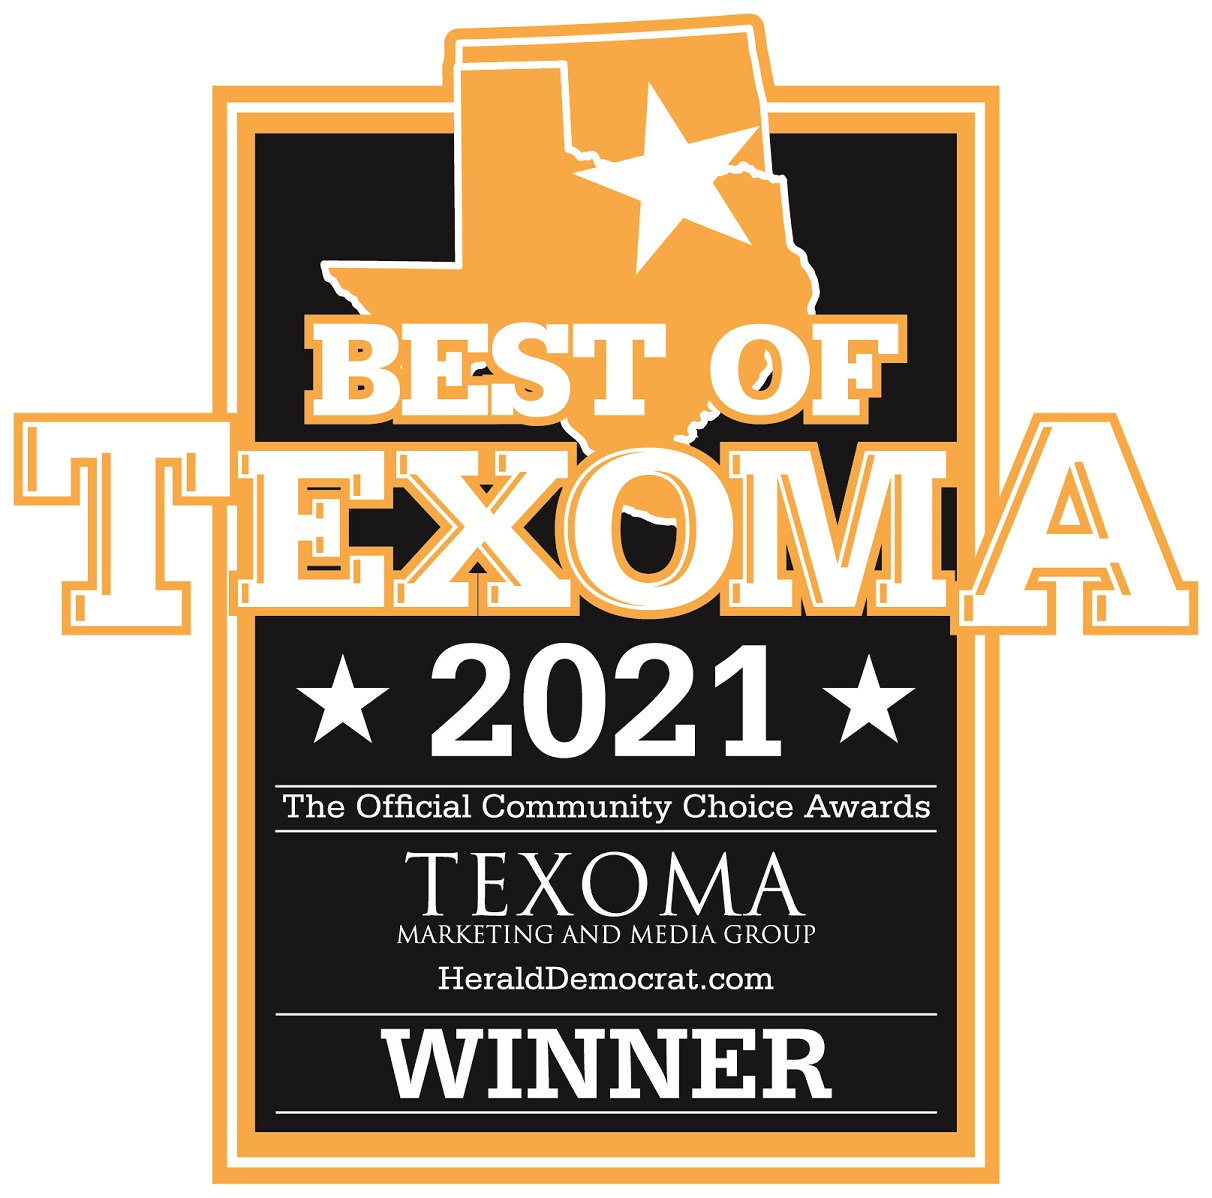 Voted Best of Texoma 2021